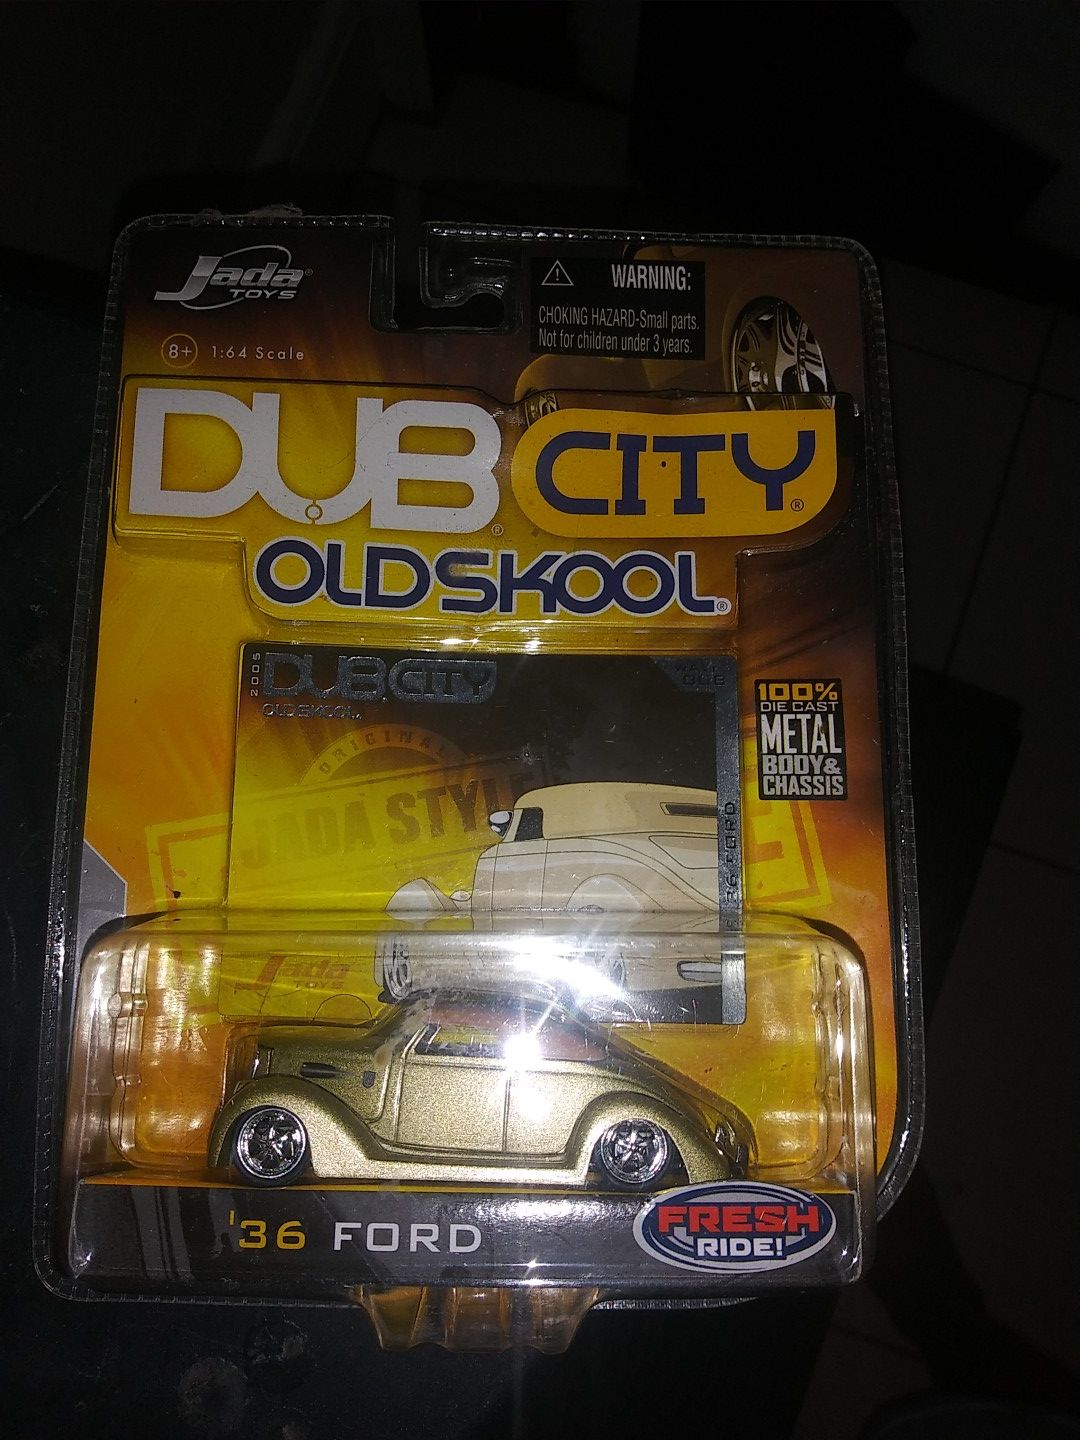 Collectible toy car